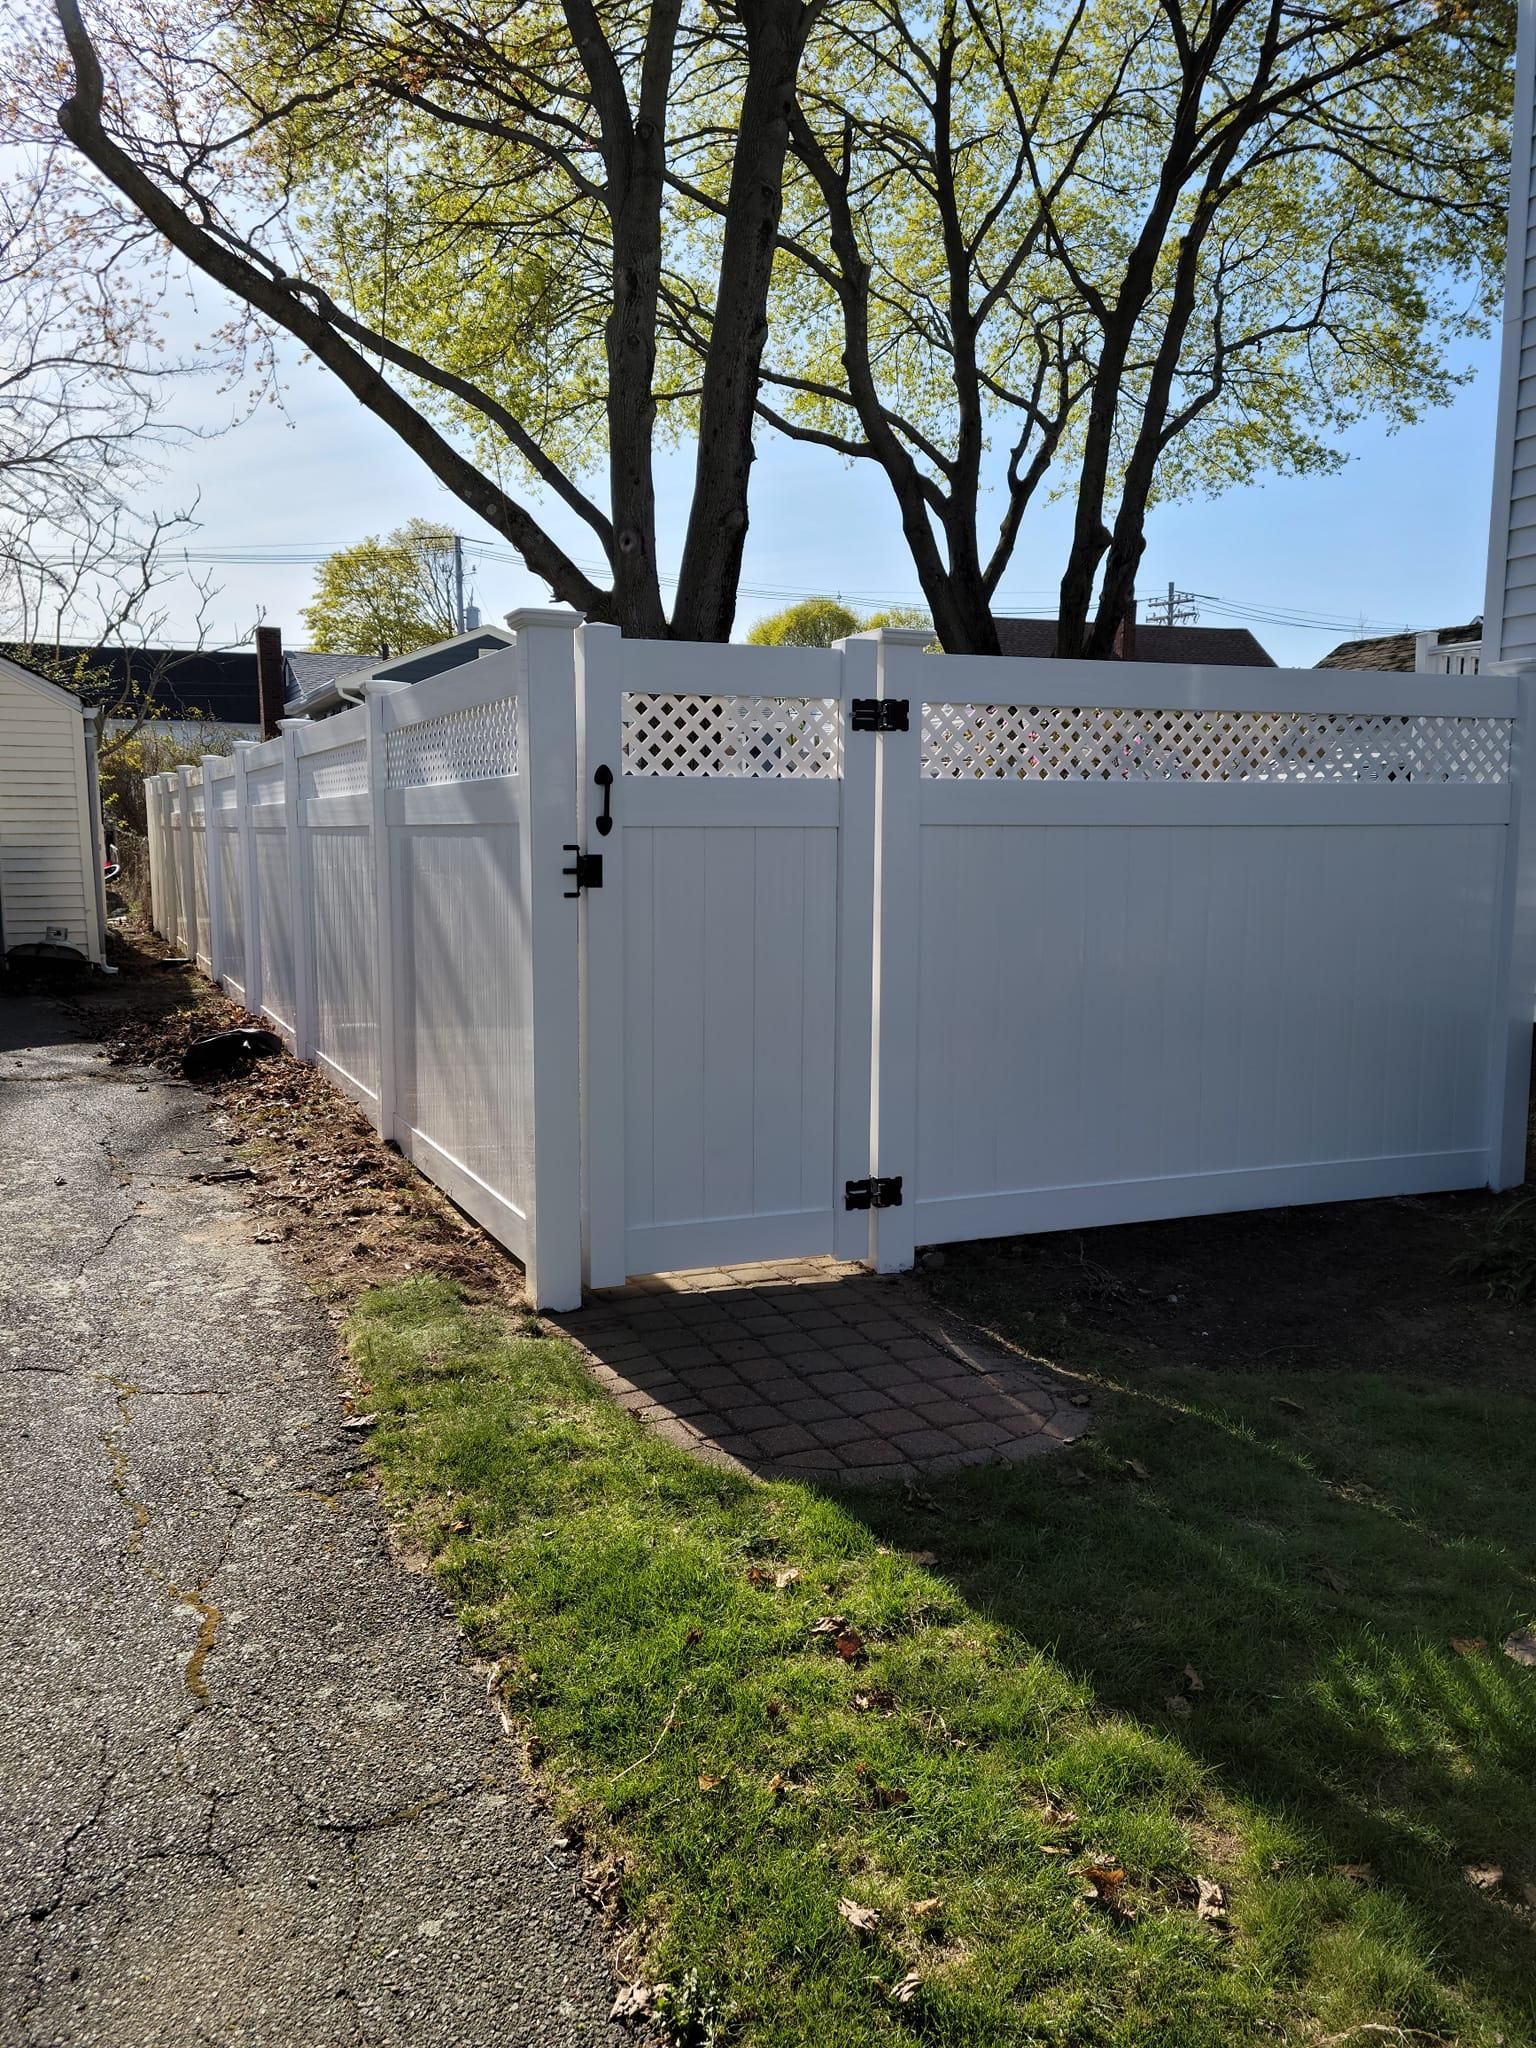 Vinyl Fences for Azorean Fence in Peabody, MA